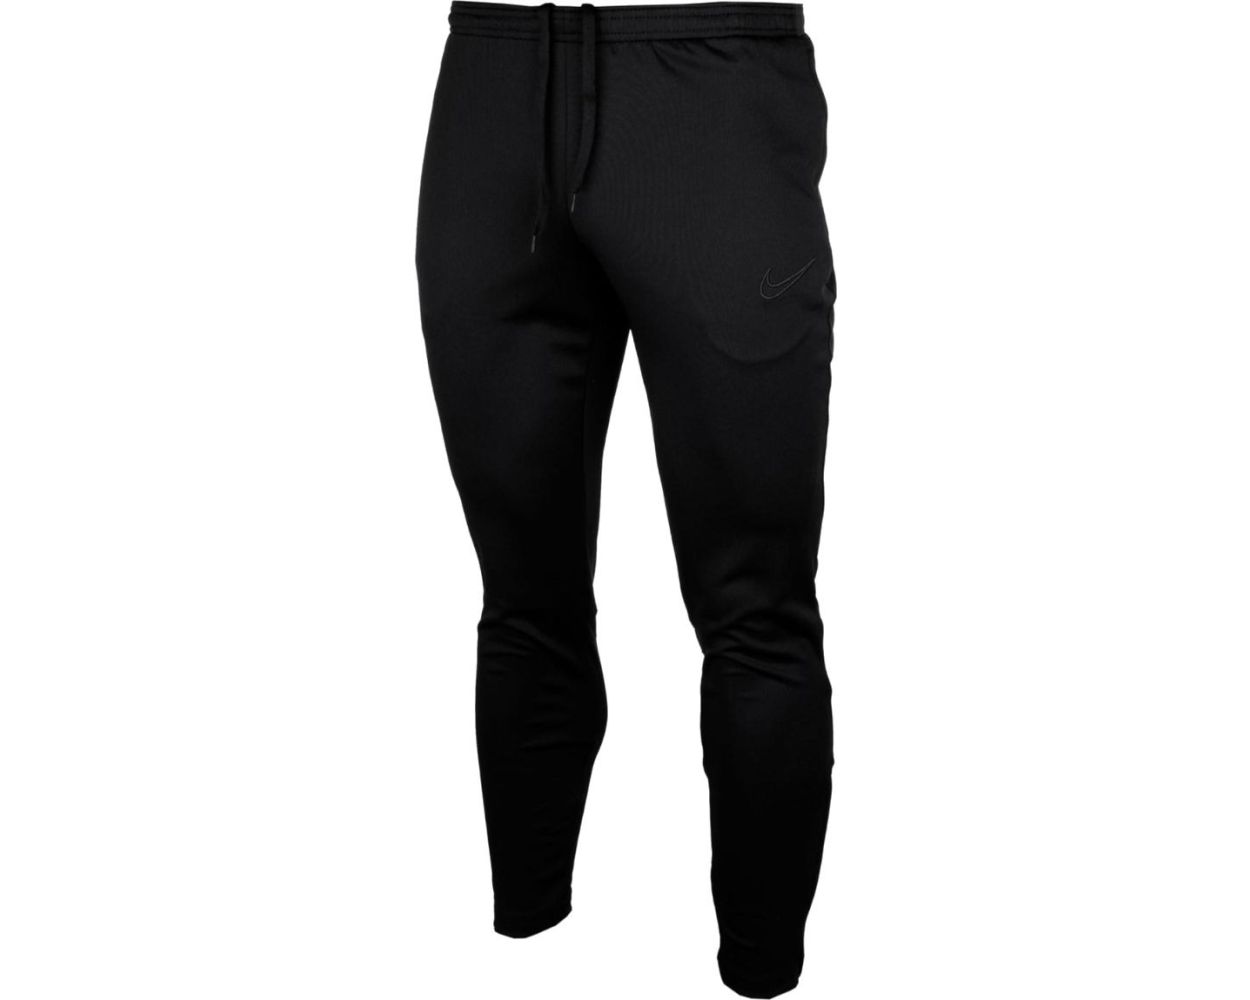 Therma-FIT Pants & Tights. Nike.com